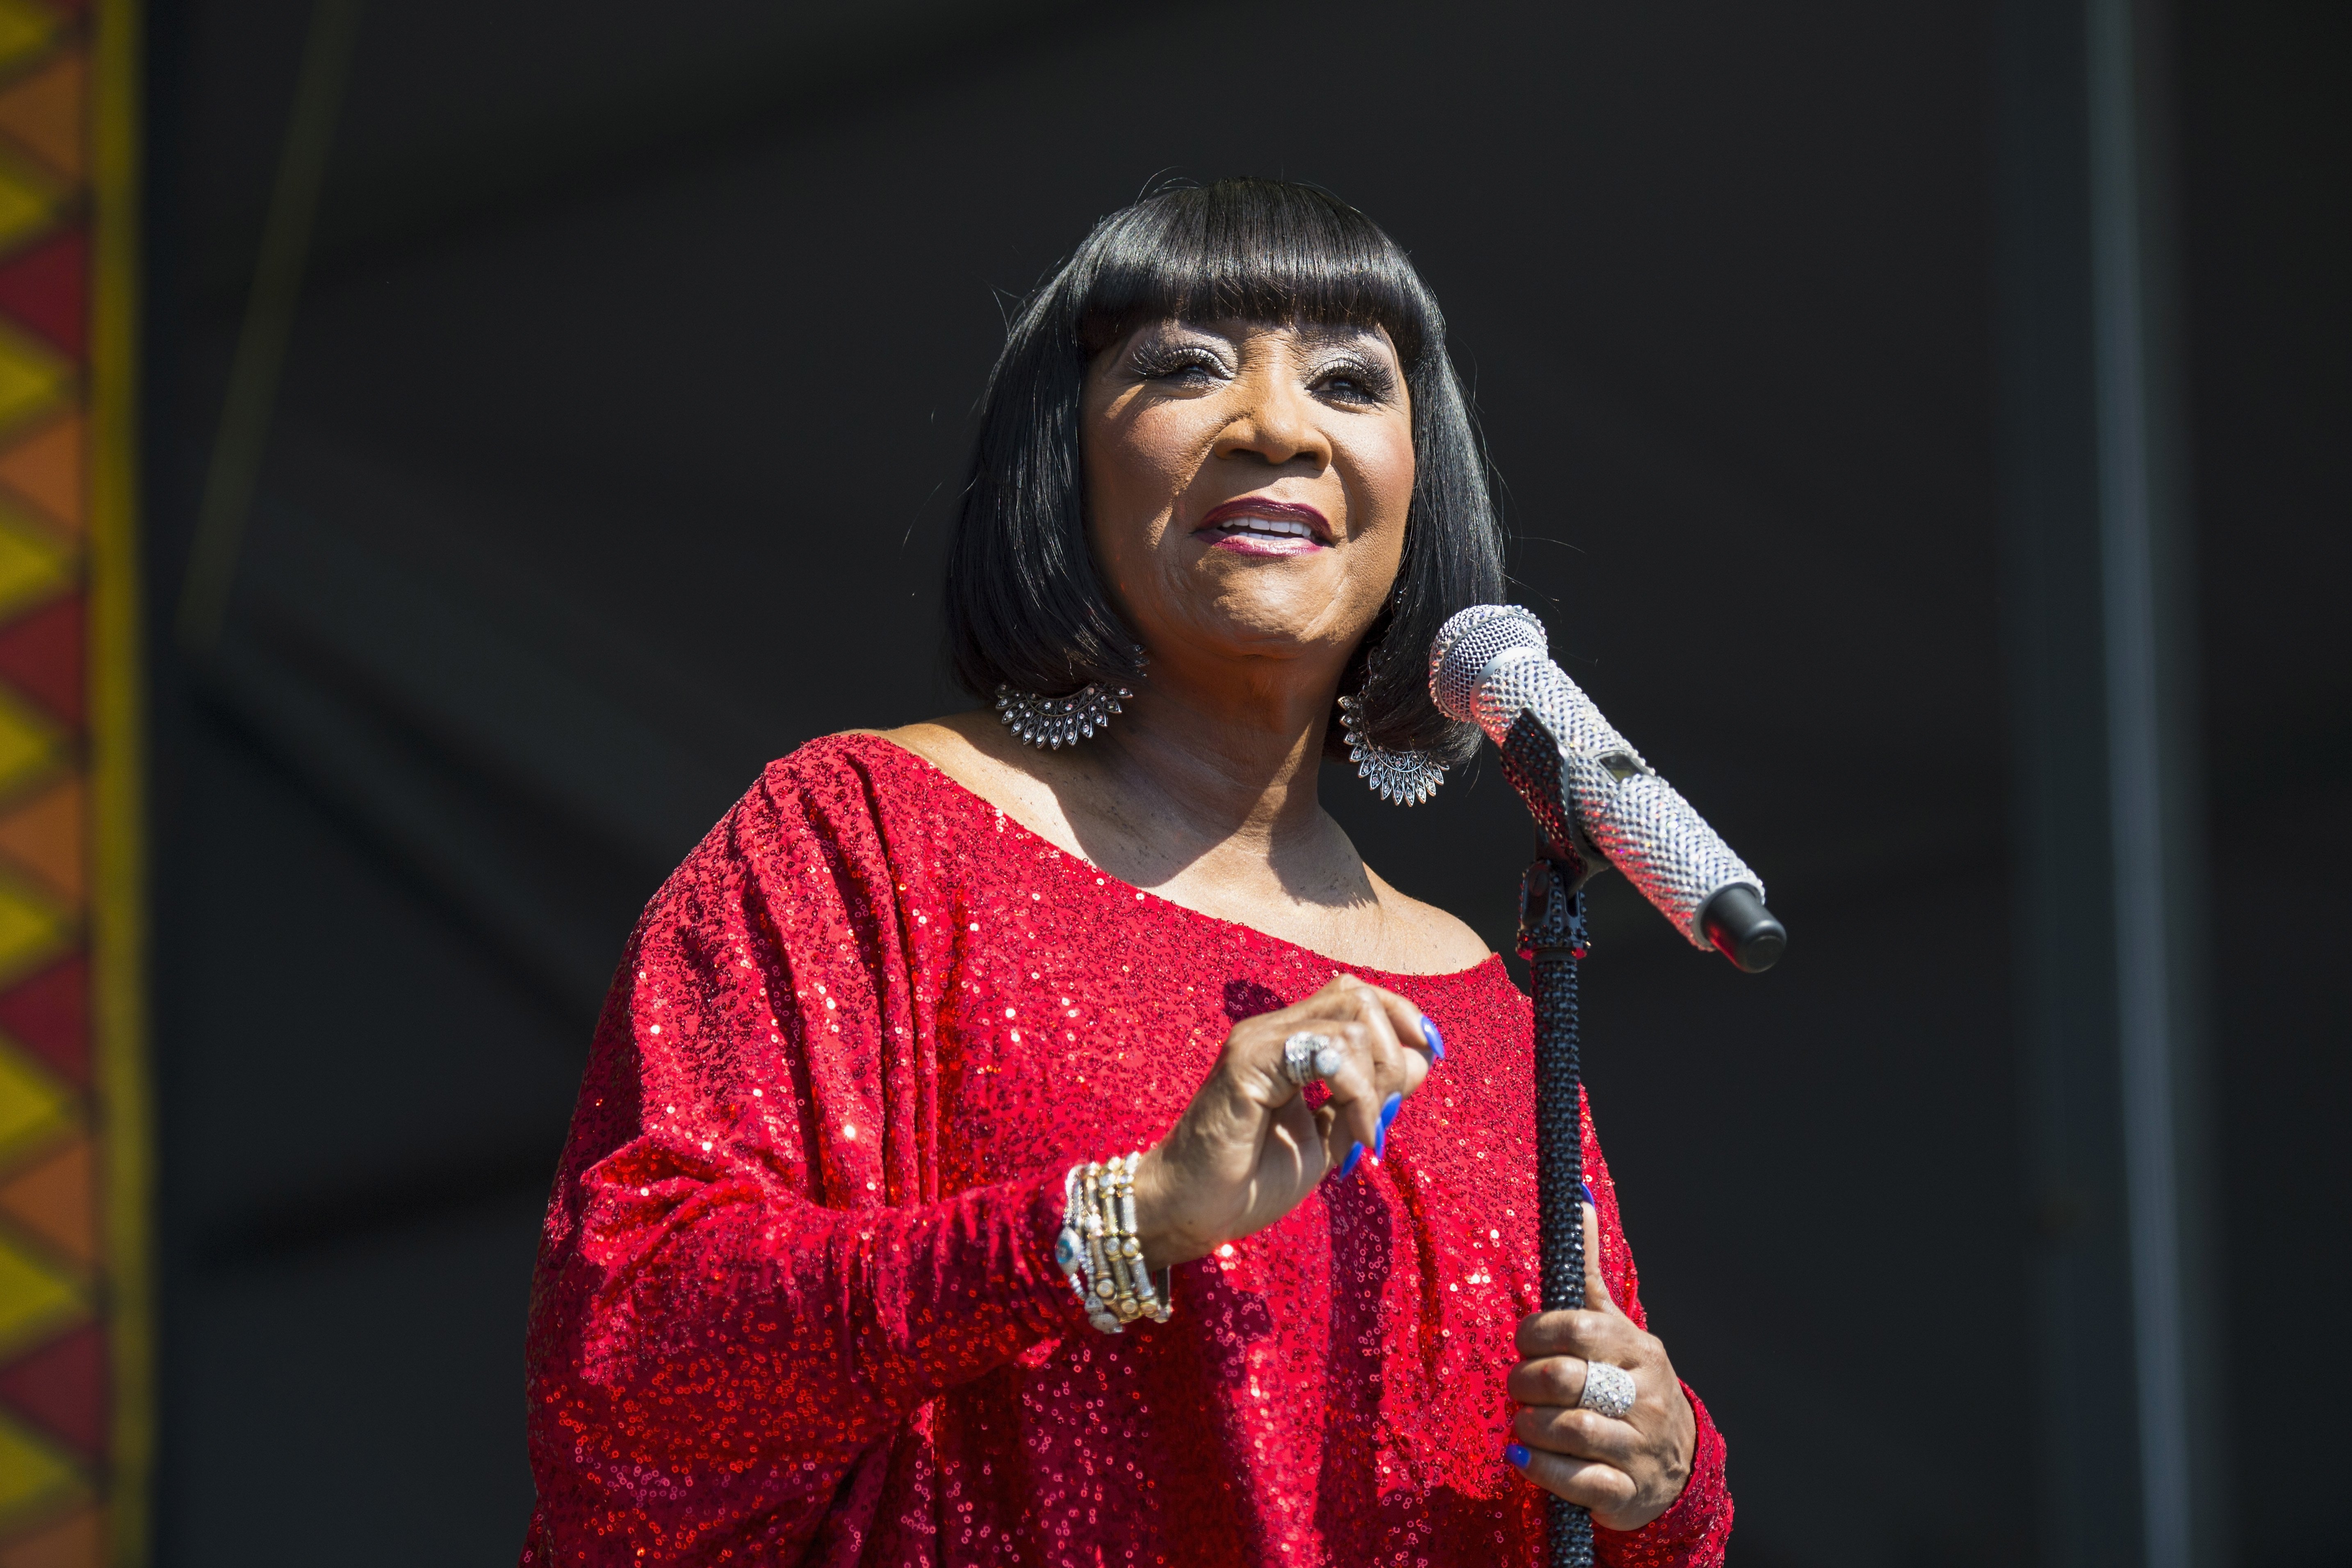 Patti LaBelle performing in New Orleans in May 2017. | Photo: Getty Images